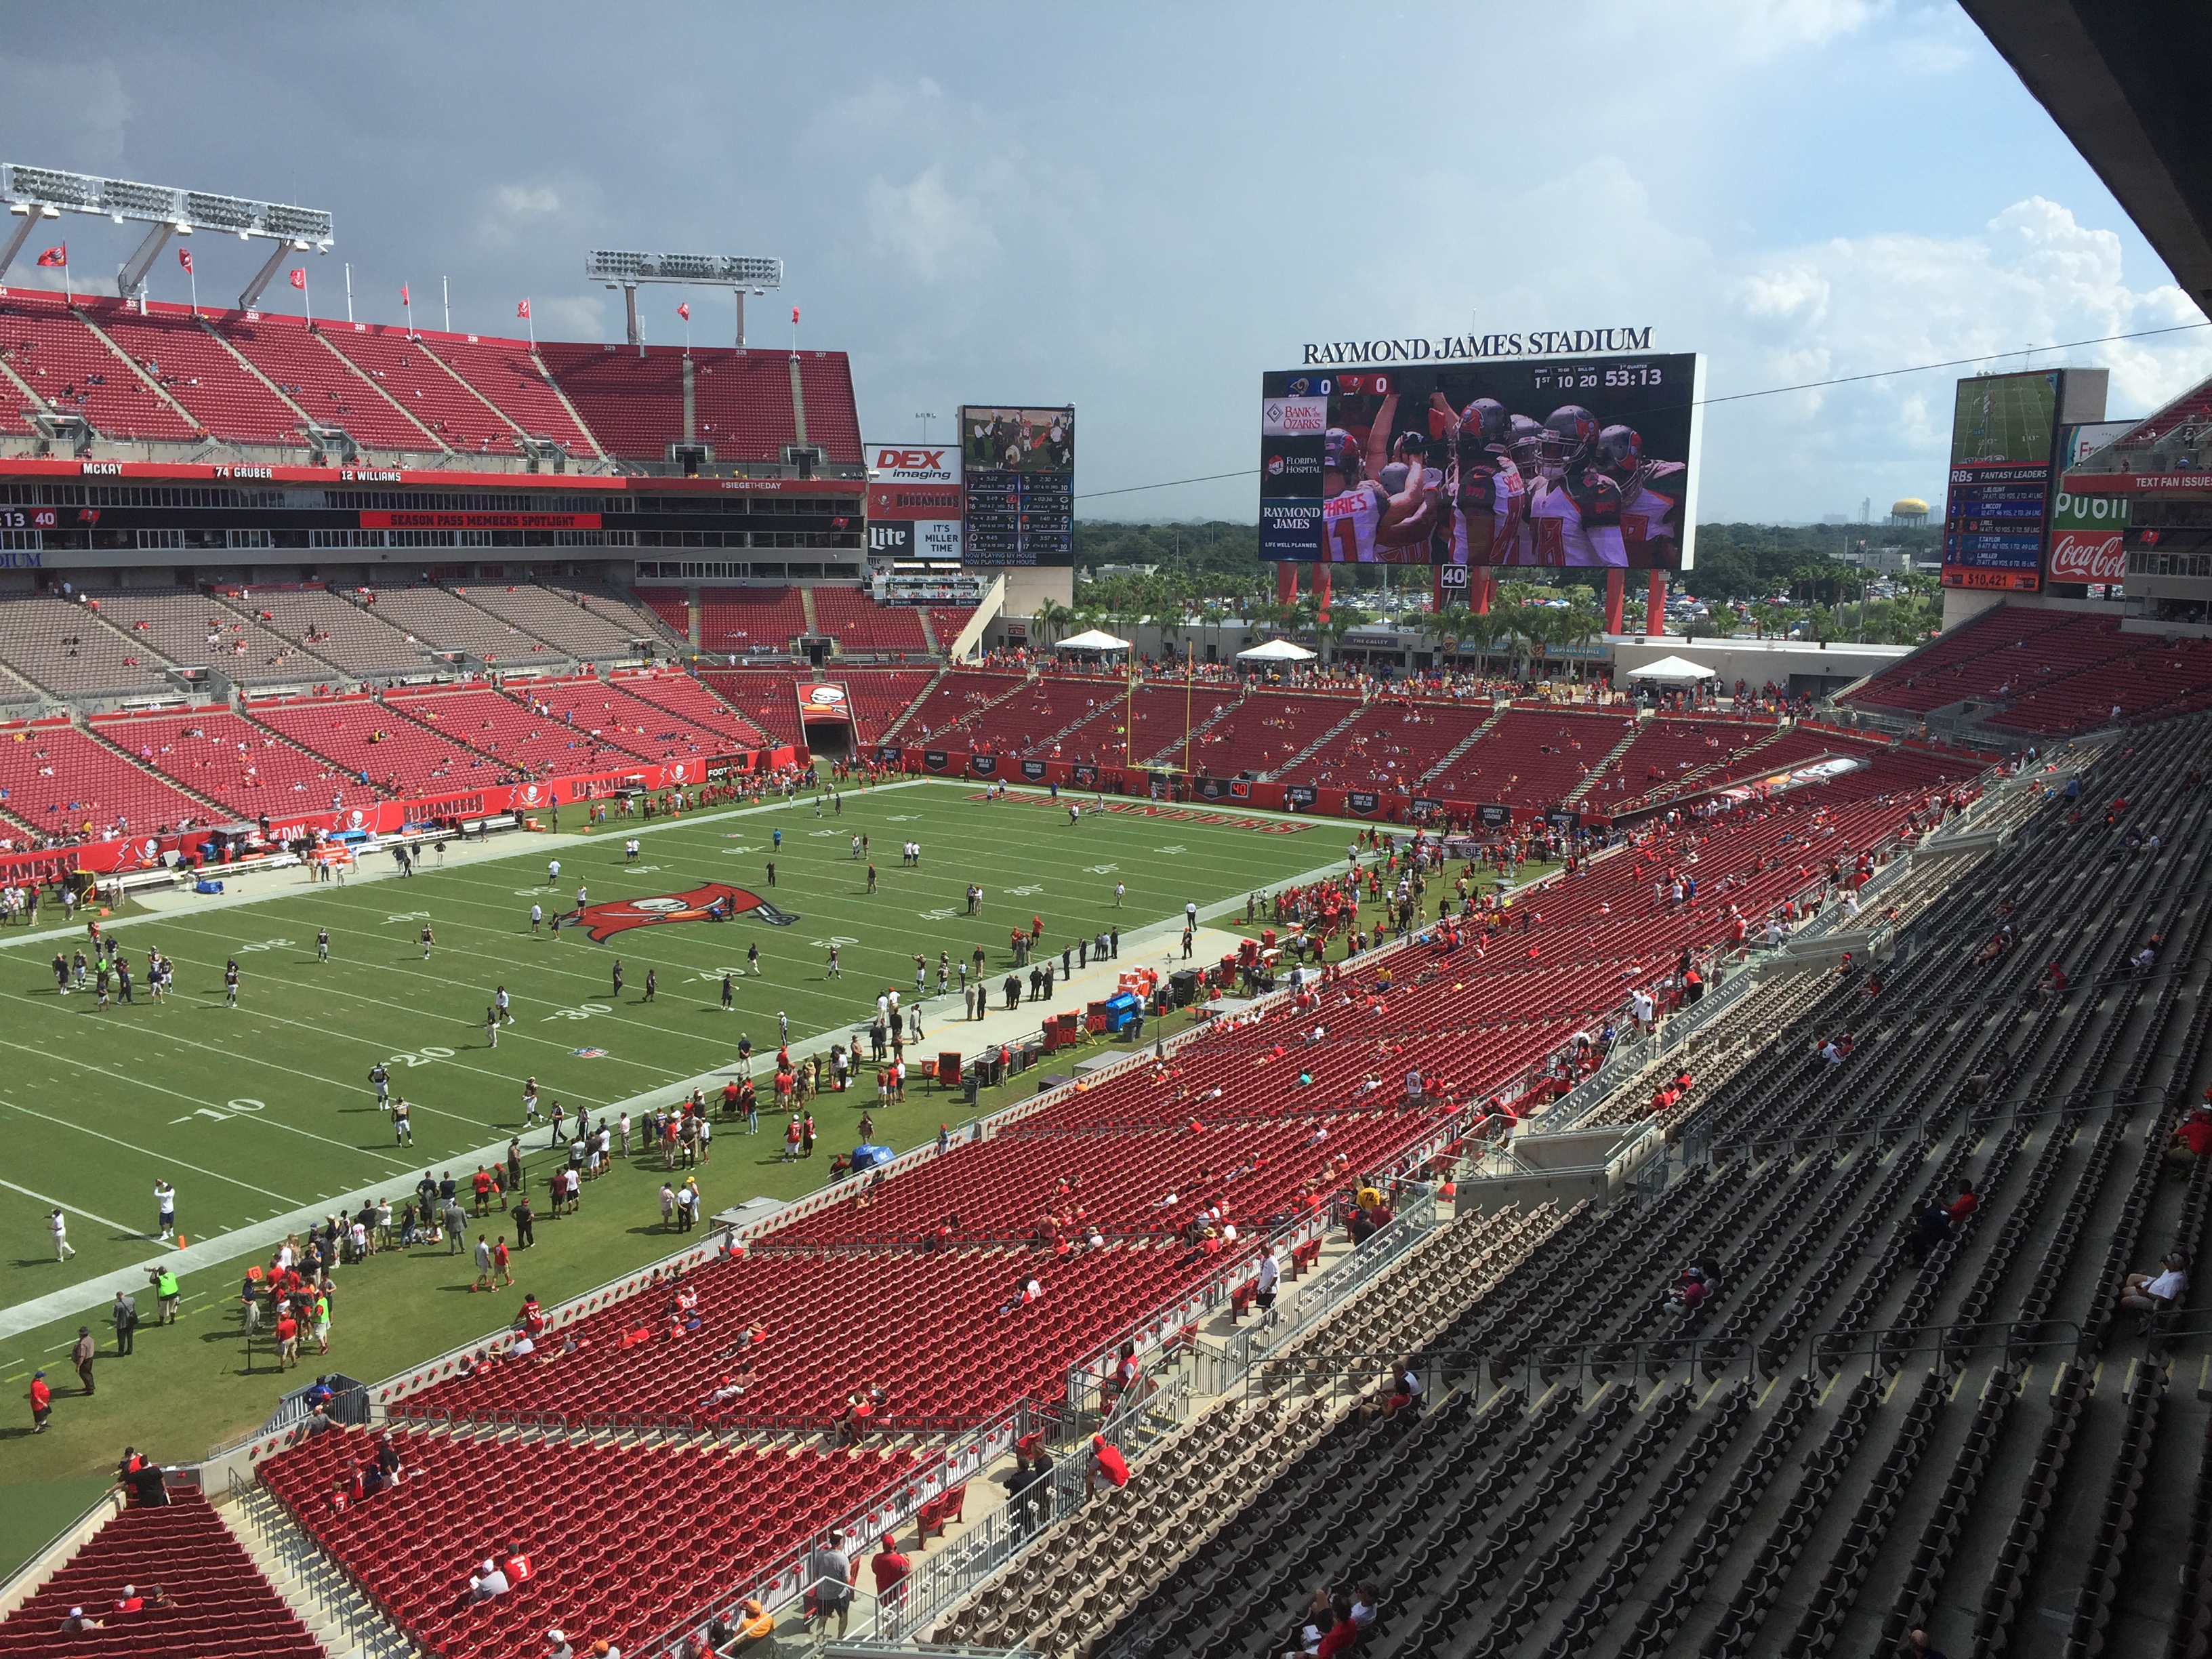 The field at Raymond James Stadium in Tampa Bay, Florida